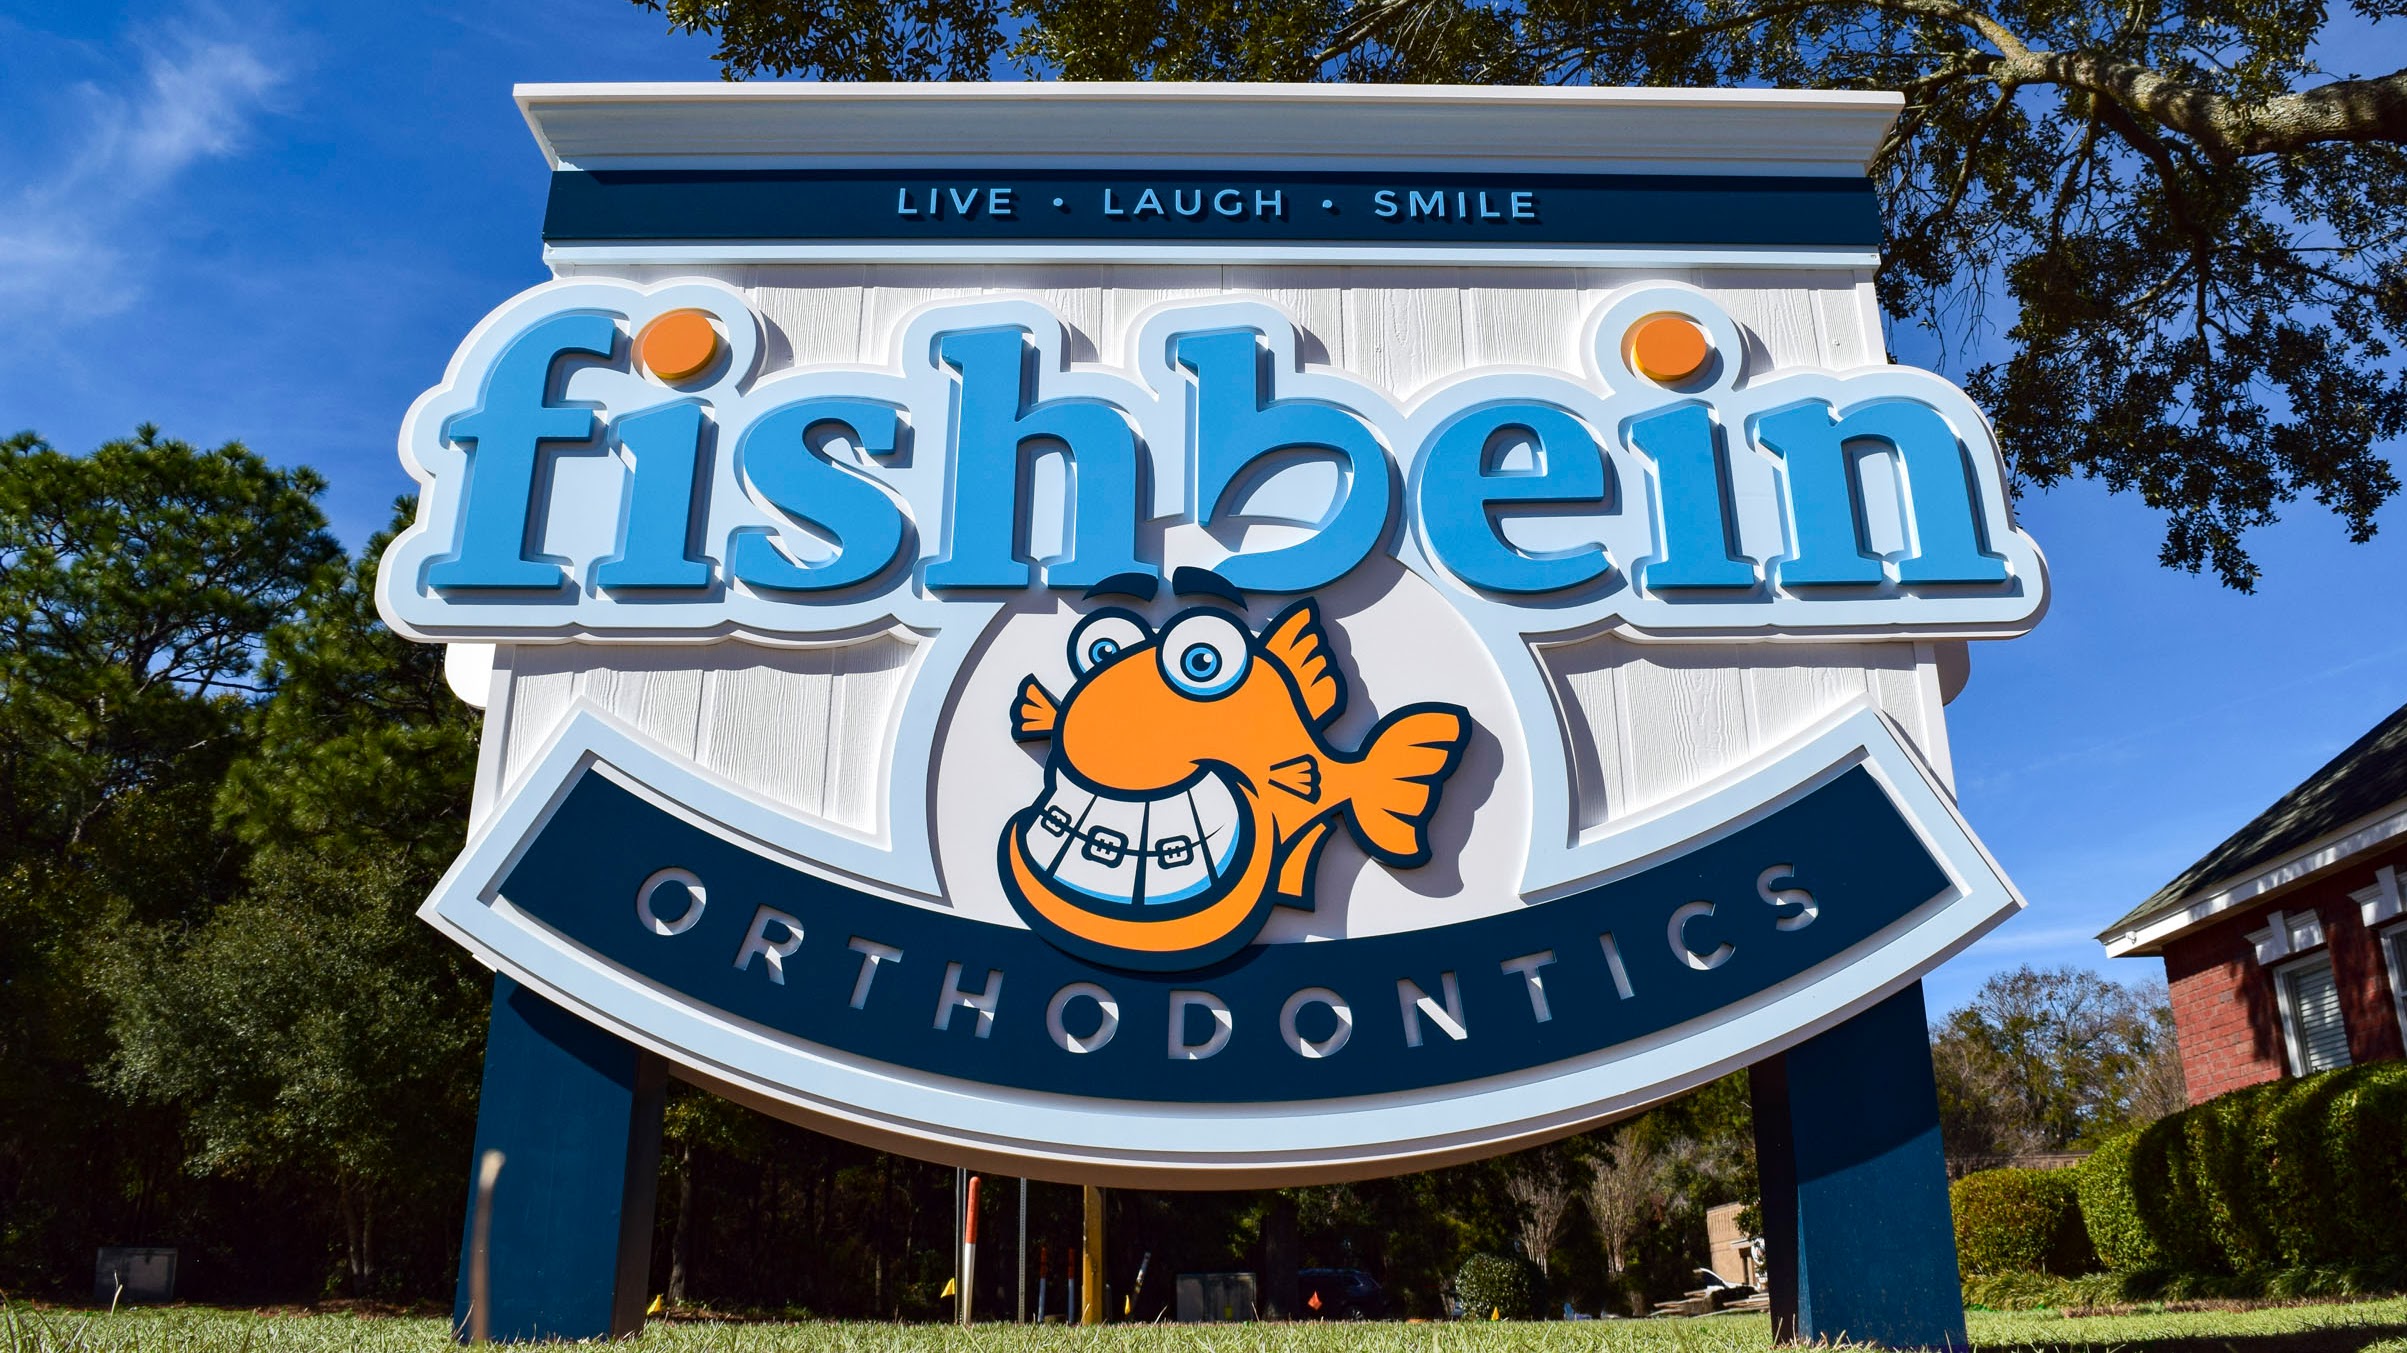 Architectural signage for Fishbein Orthodontics by Pensacola Sign 